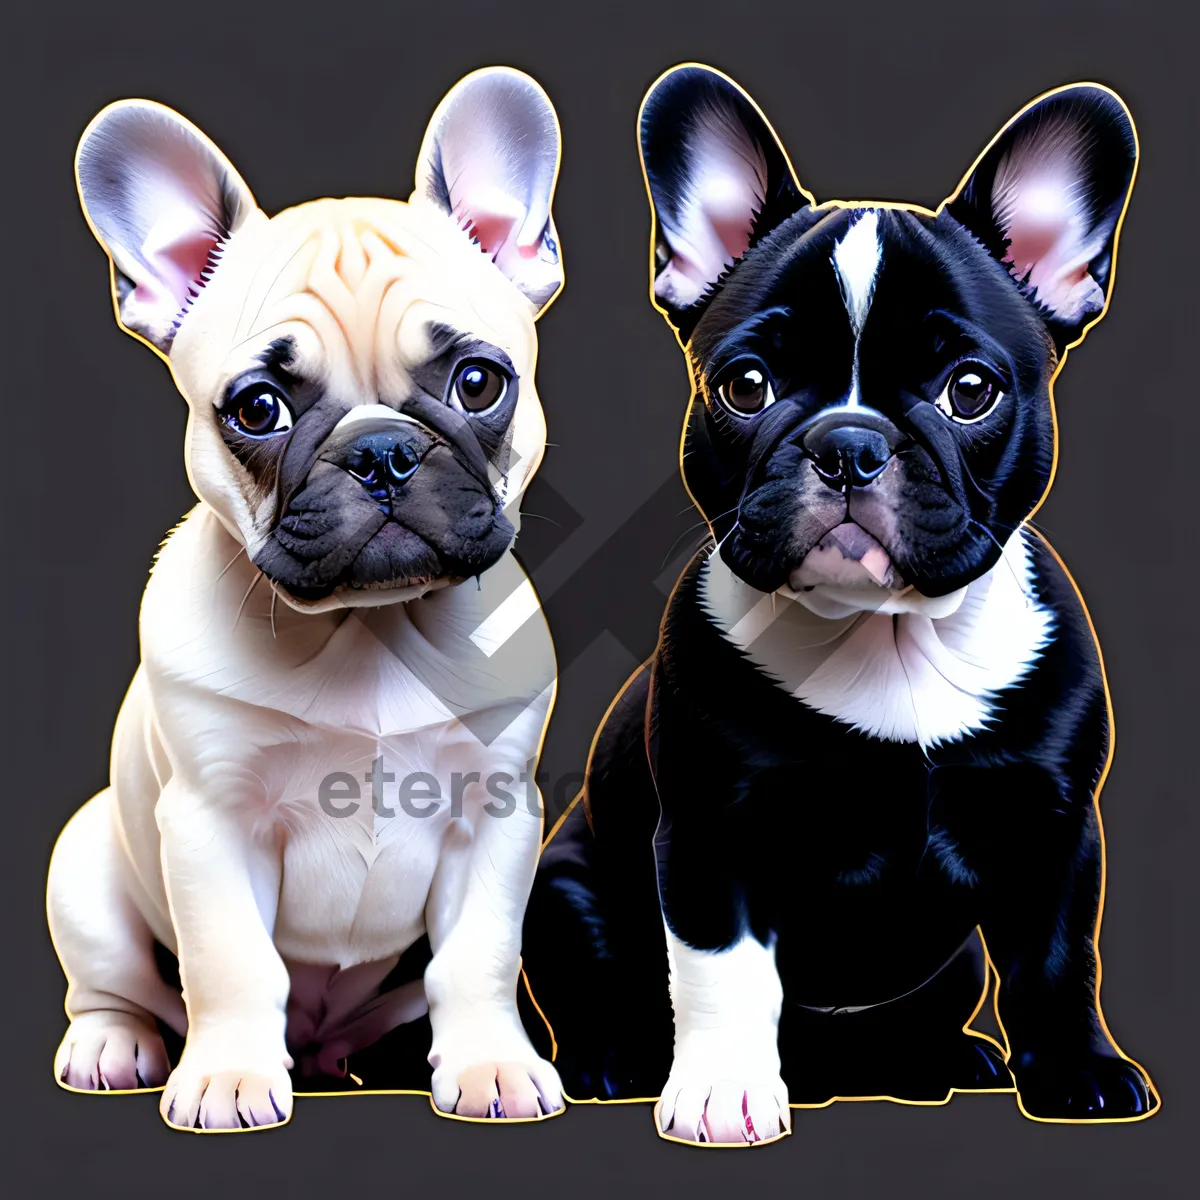 Picture of Endearing French bulldog puppies, blessed with adorable wrinkles that add to their cuteness